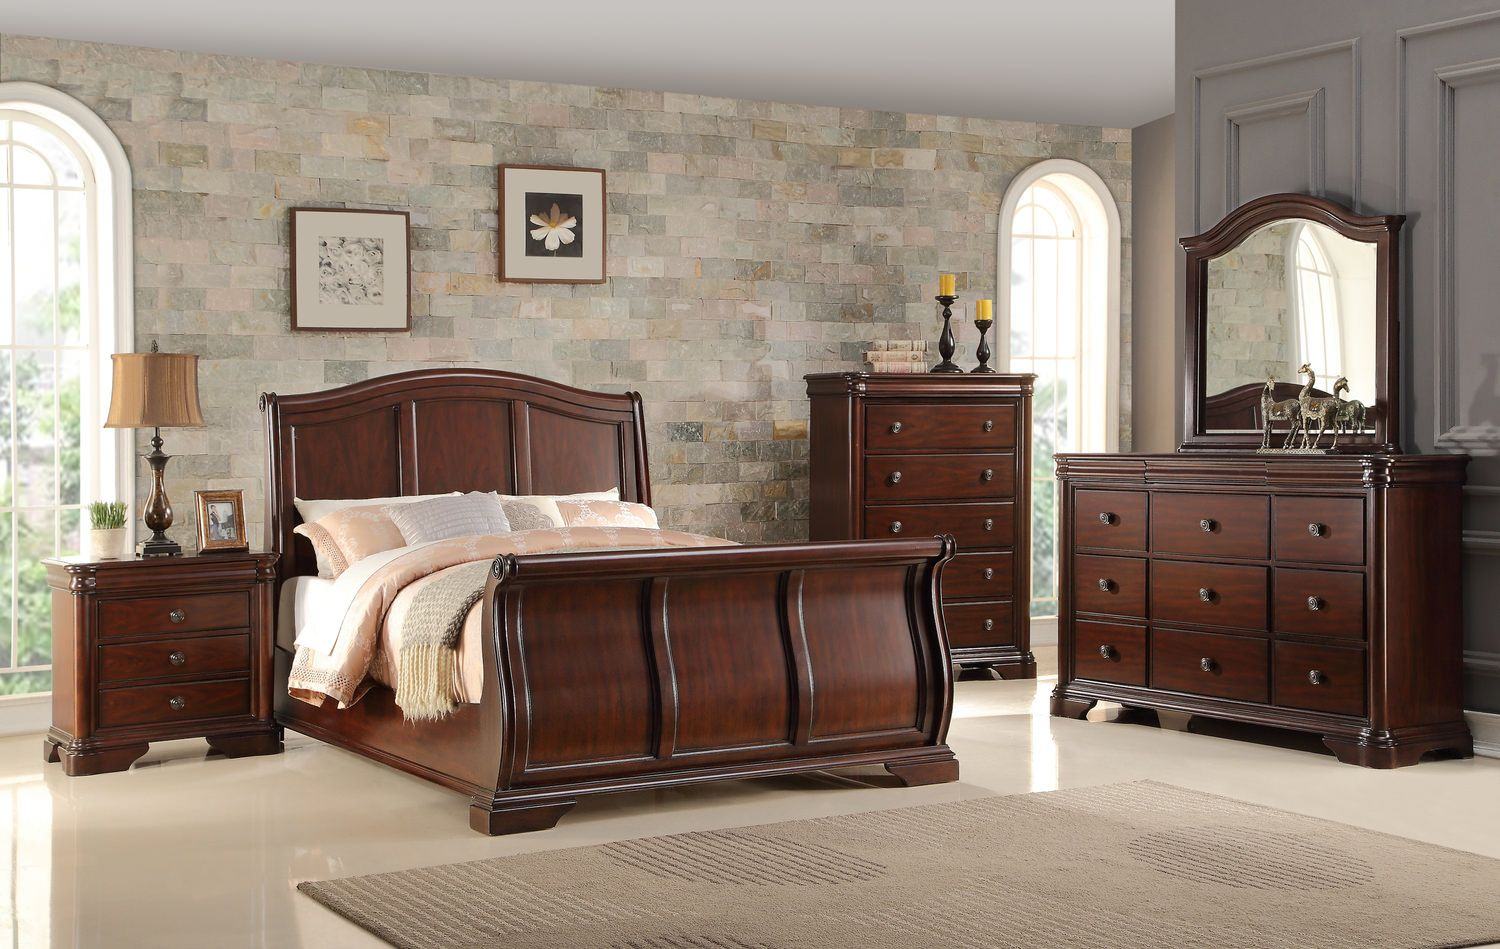 Rochelle Queen Bedroom Suite Deco Ideas King Bedroom Sets King within dimensions 1500 X 949